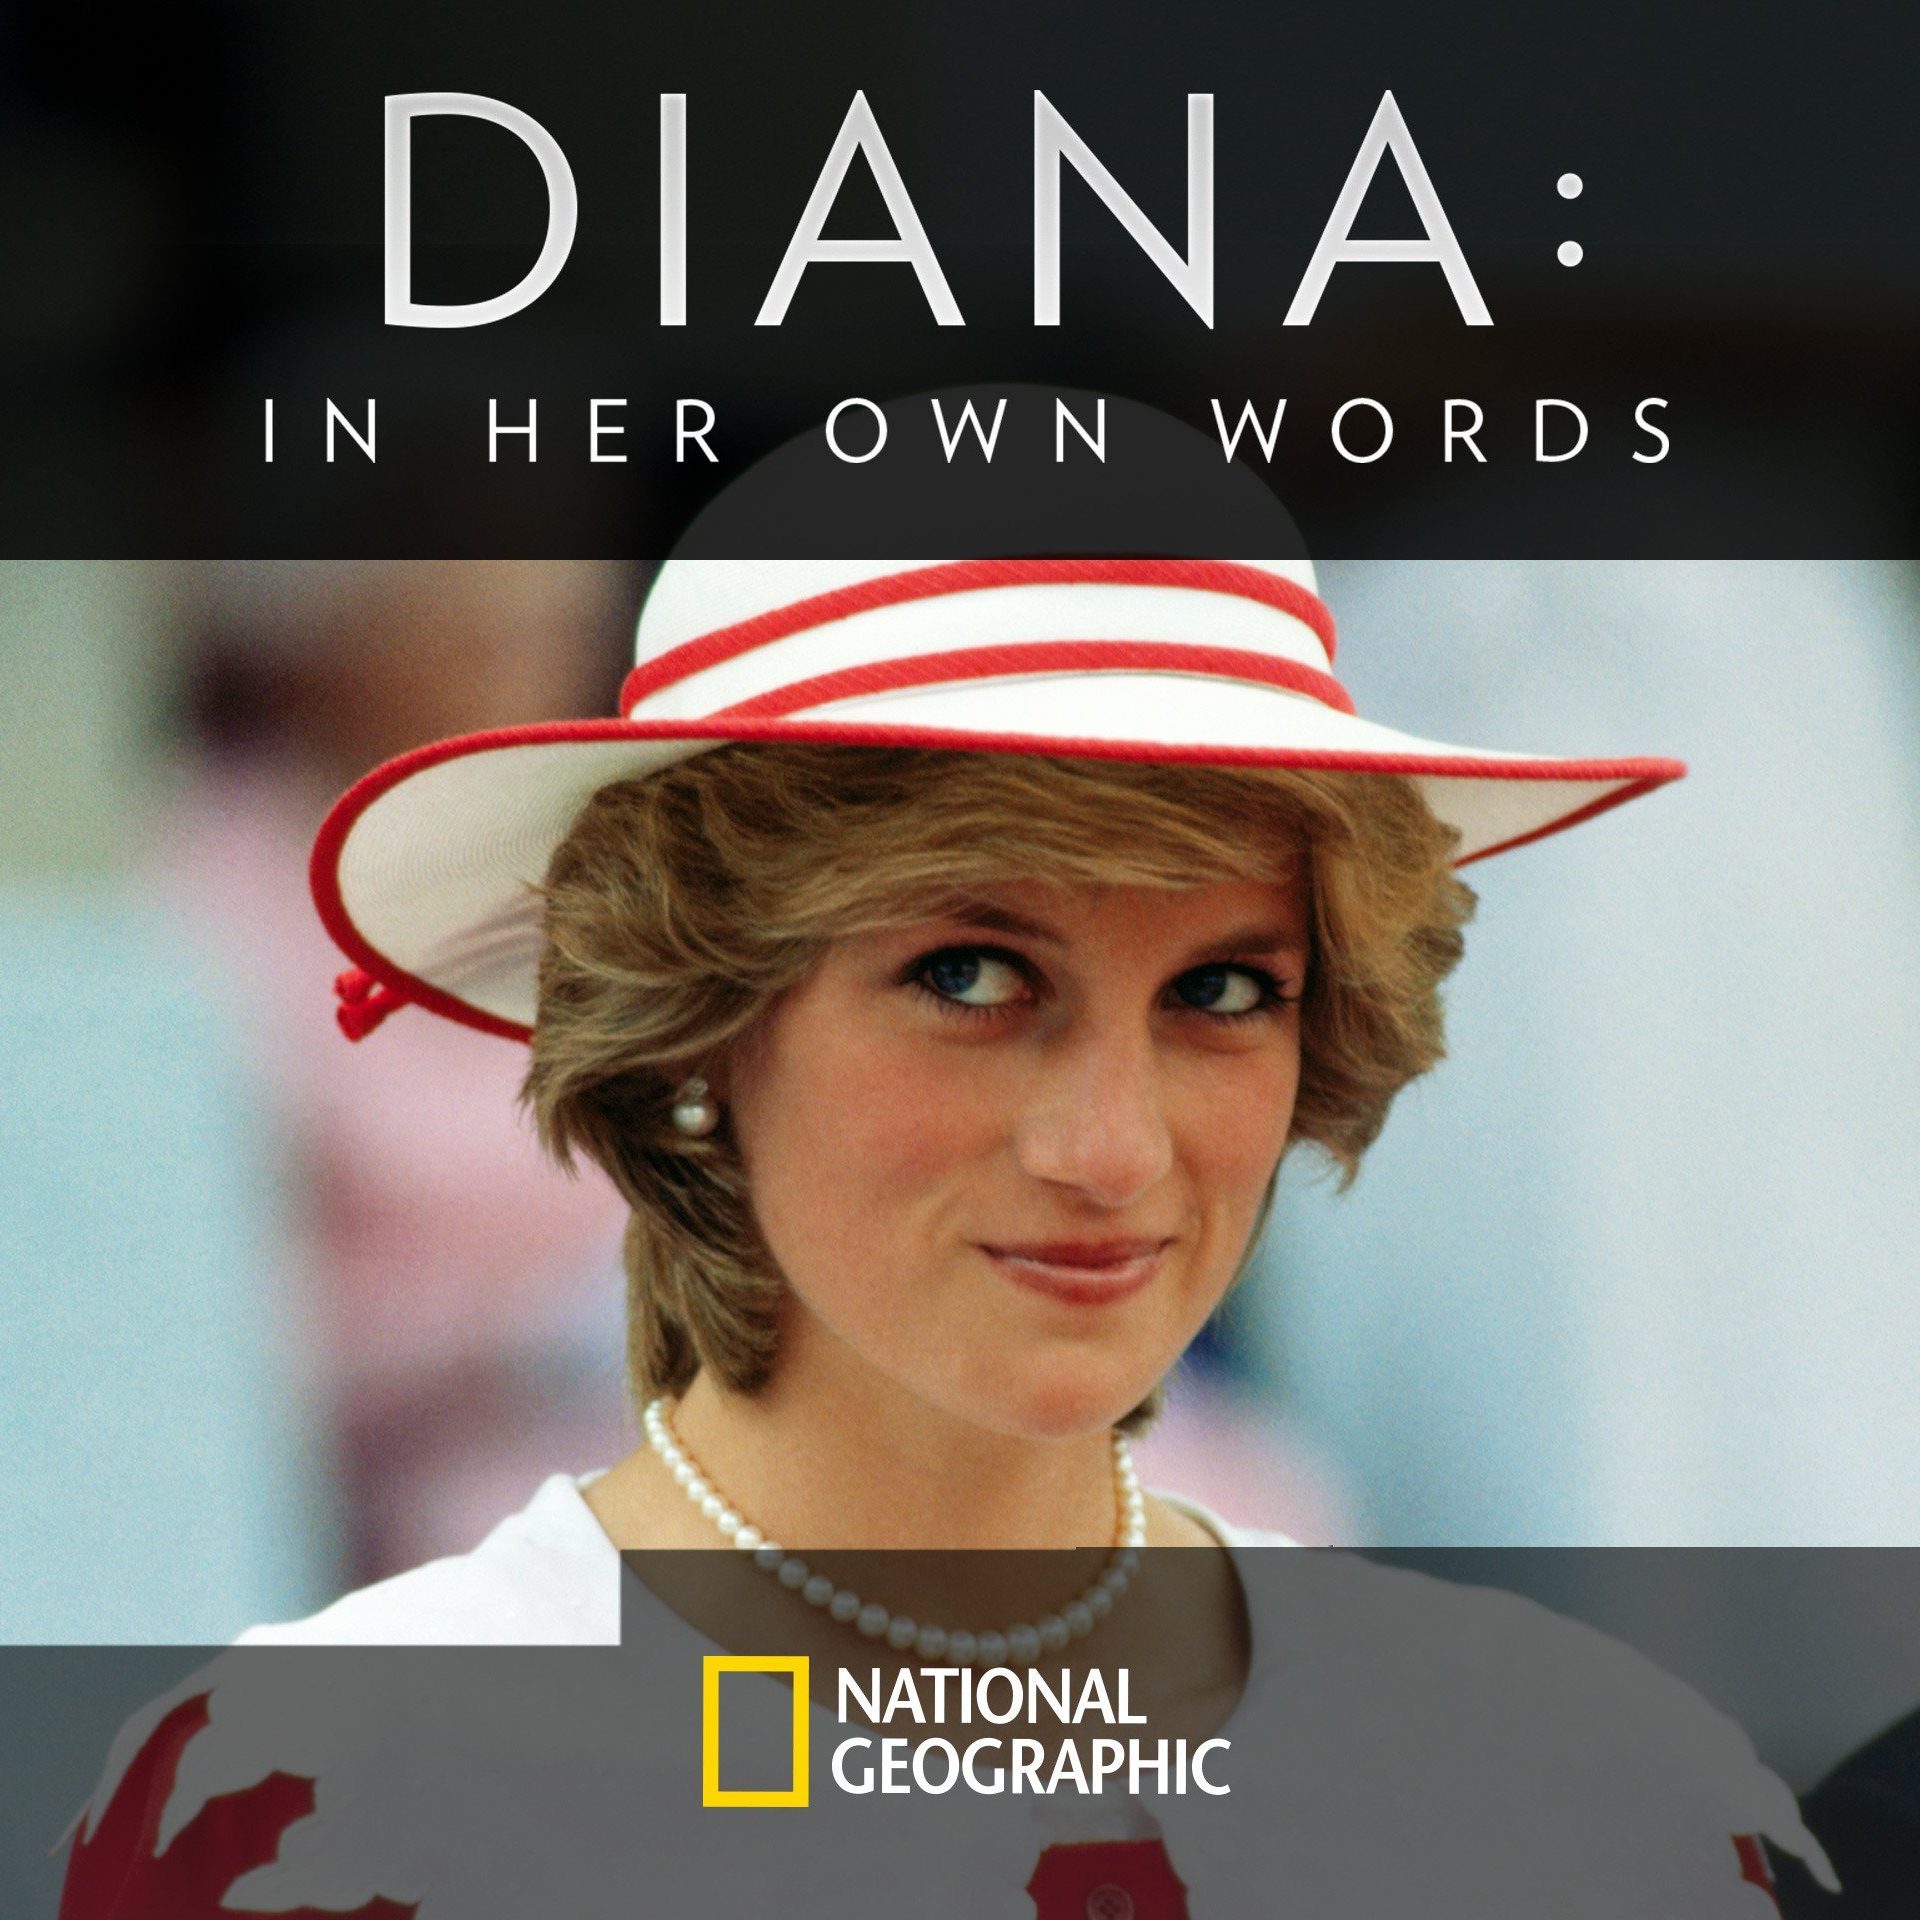 Princess Diana Documentary Key Details About HBO's "The Princess"